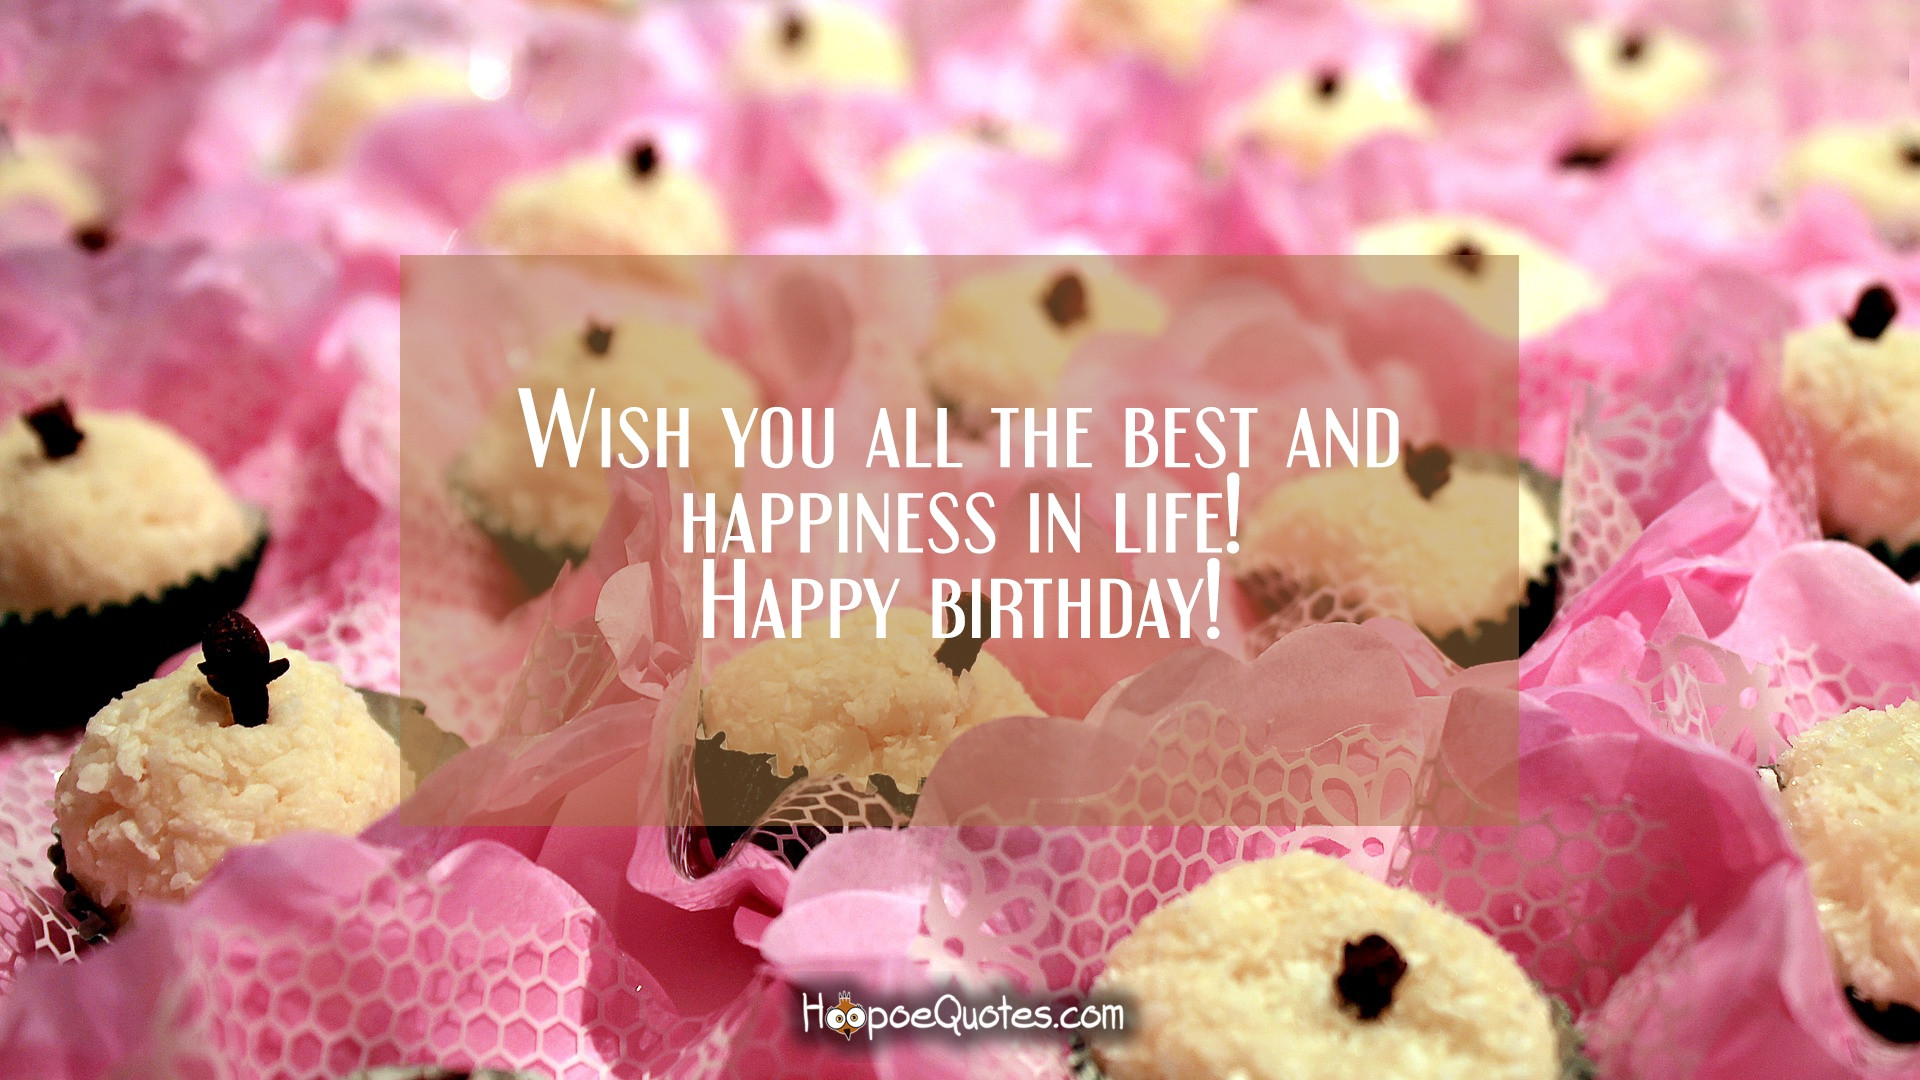 Wishing You A Happy Birthday Quotes
 Wish you all the best and happiness in life Happy